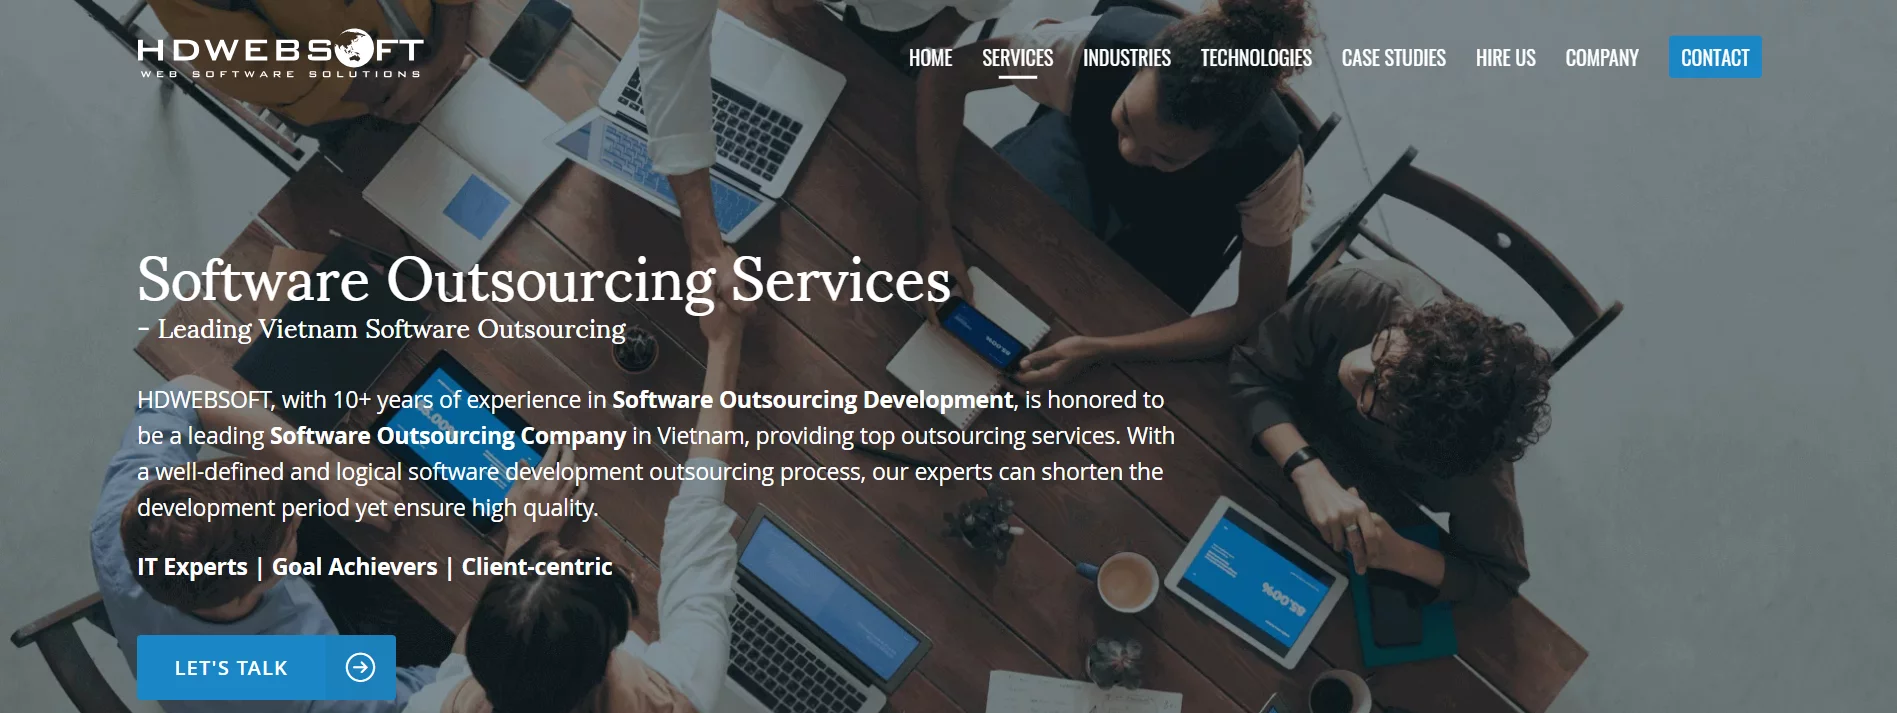 hdwebsoft software-outsourcing developement company